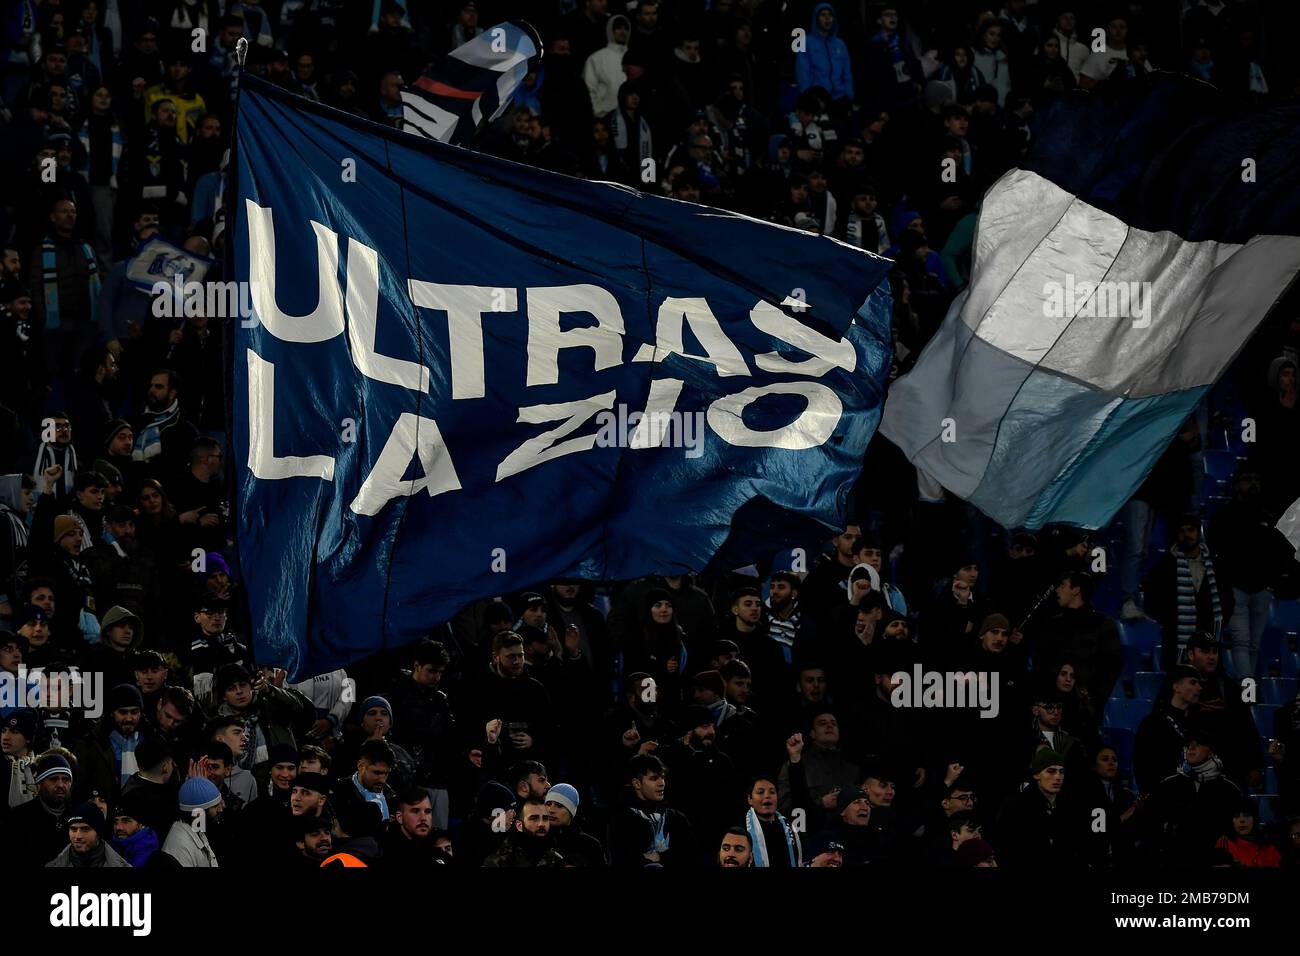 Lazio fans wave a flag with Ultras Lazio written on it during the Italy Cup football match between SS Lazio and Bologna FC at Olimpico stadium in Rome Stock Photo